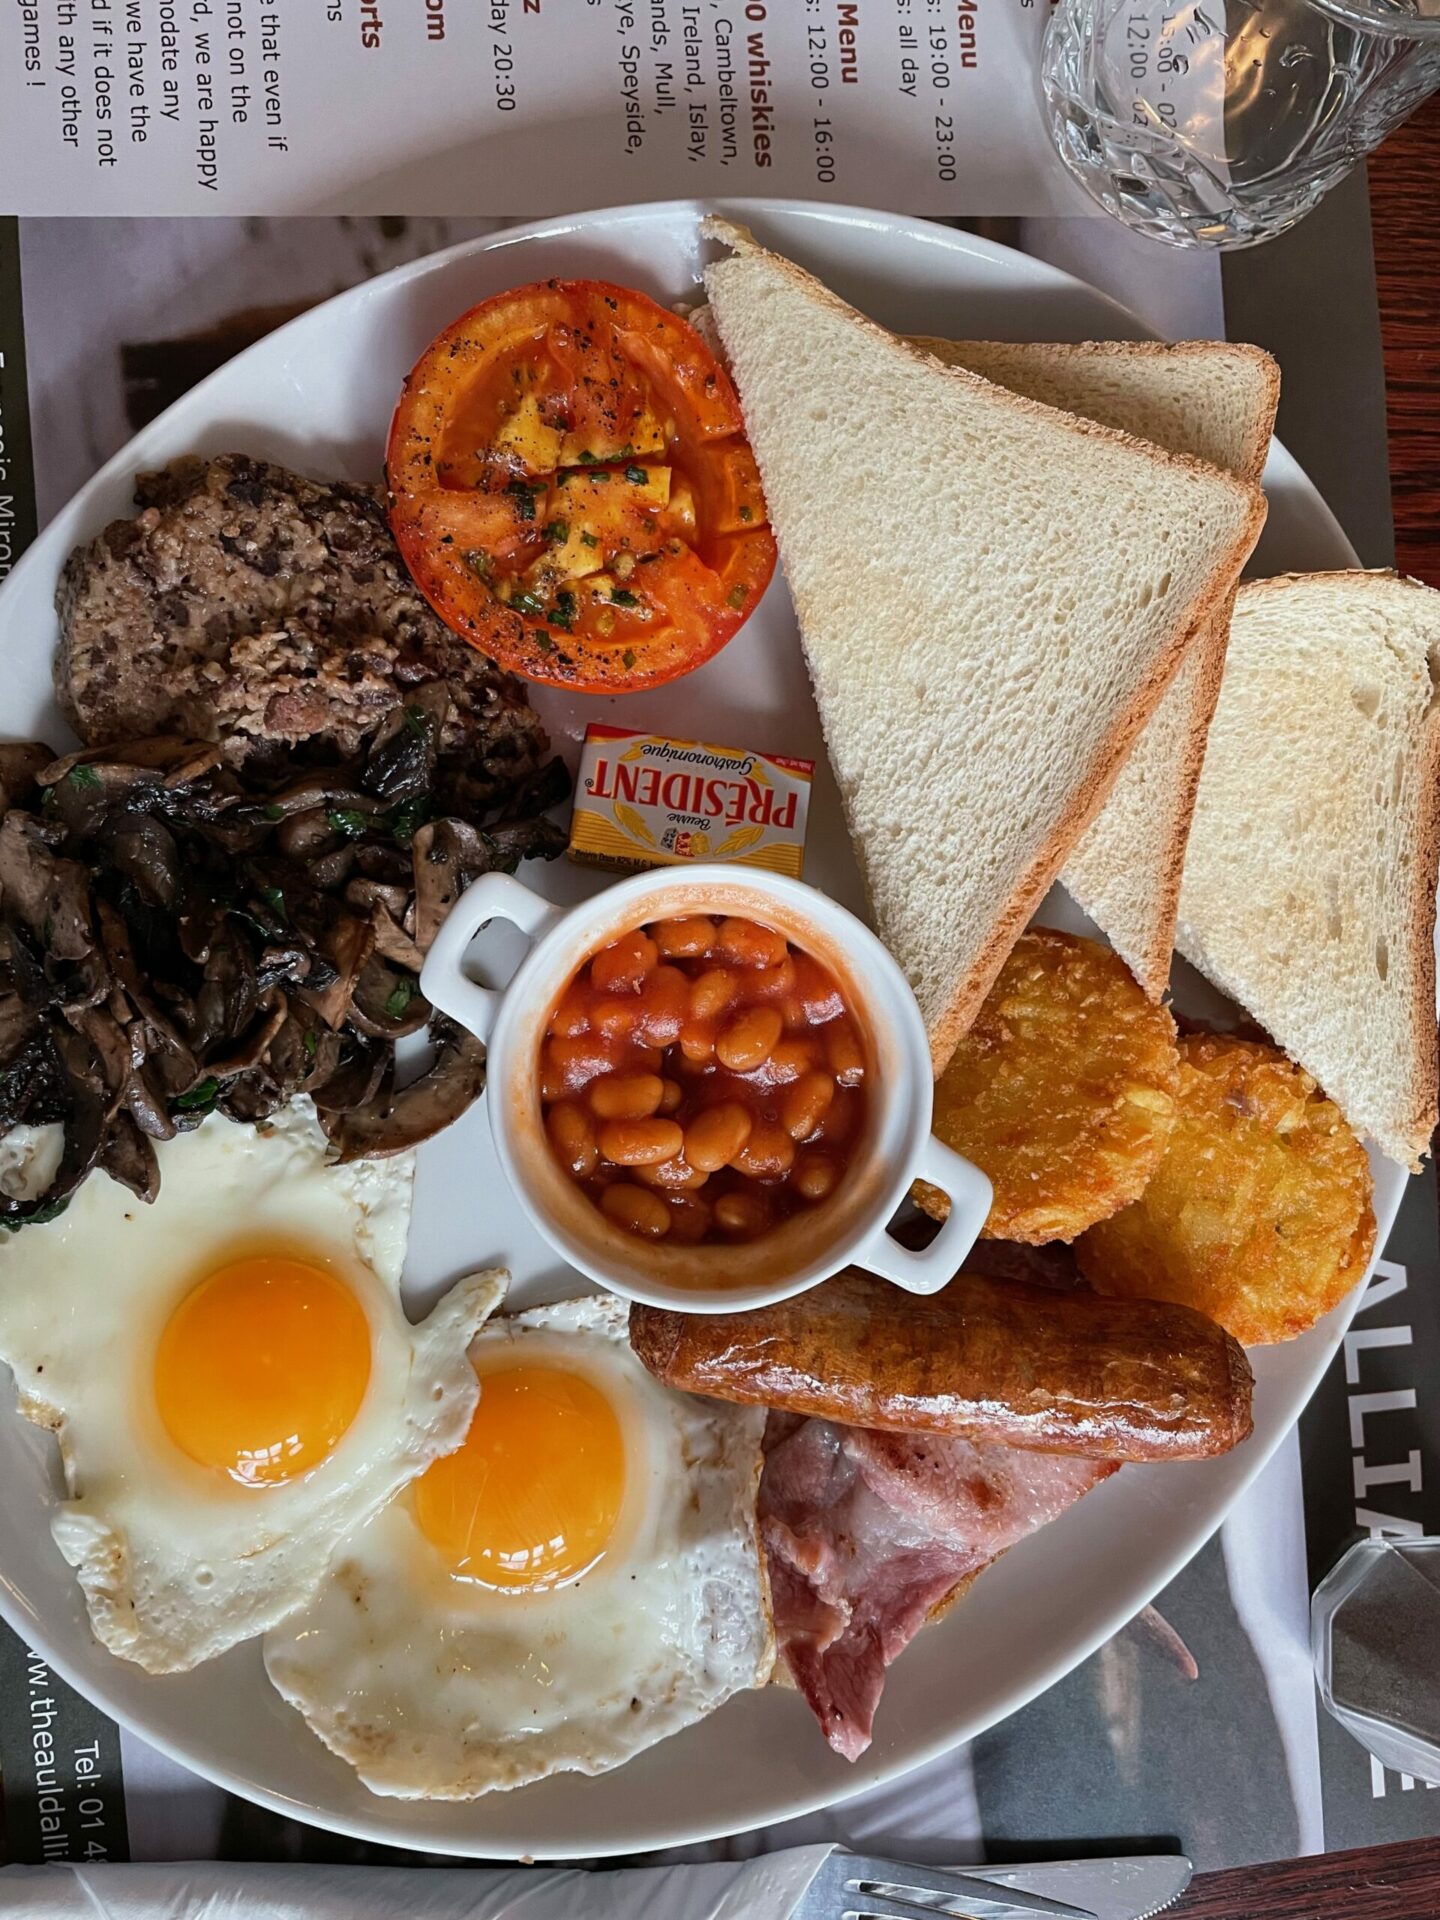 The Flying Scotsman! Eggs, Bacon, Sausage, Baked Beans, Mushrooms, Tomato, Toast and... Haggis!